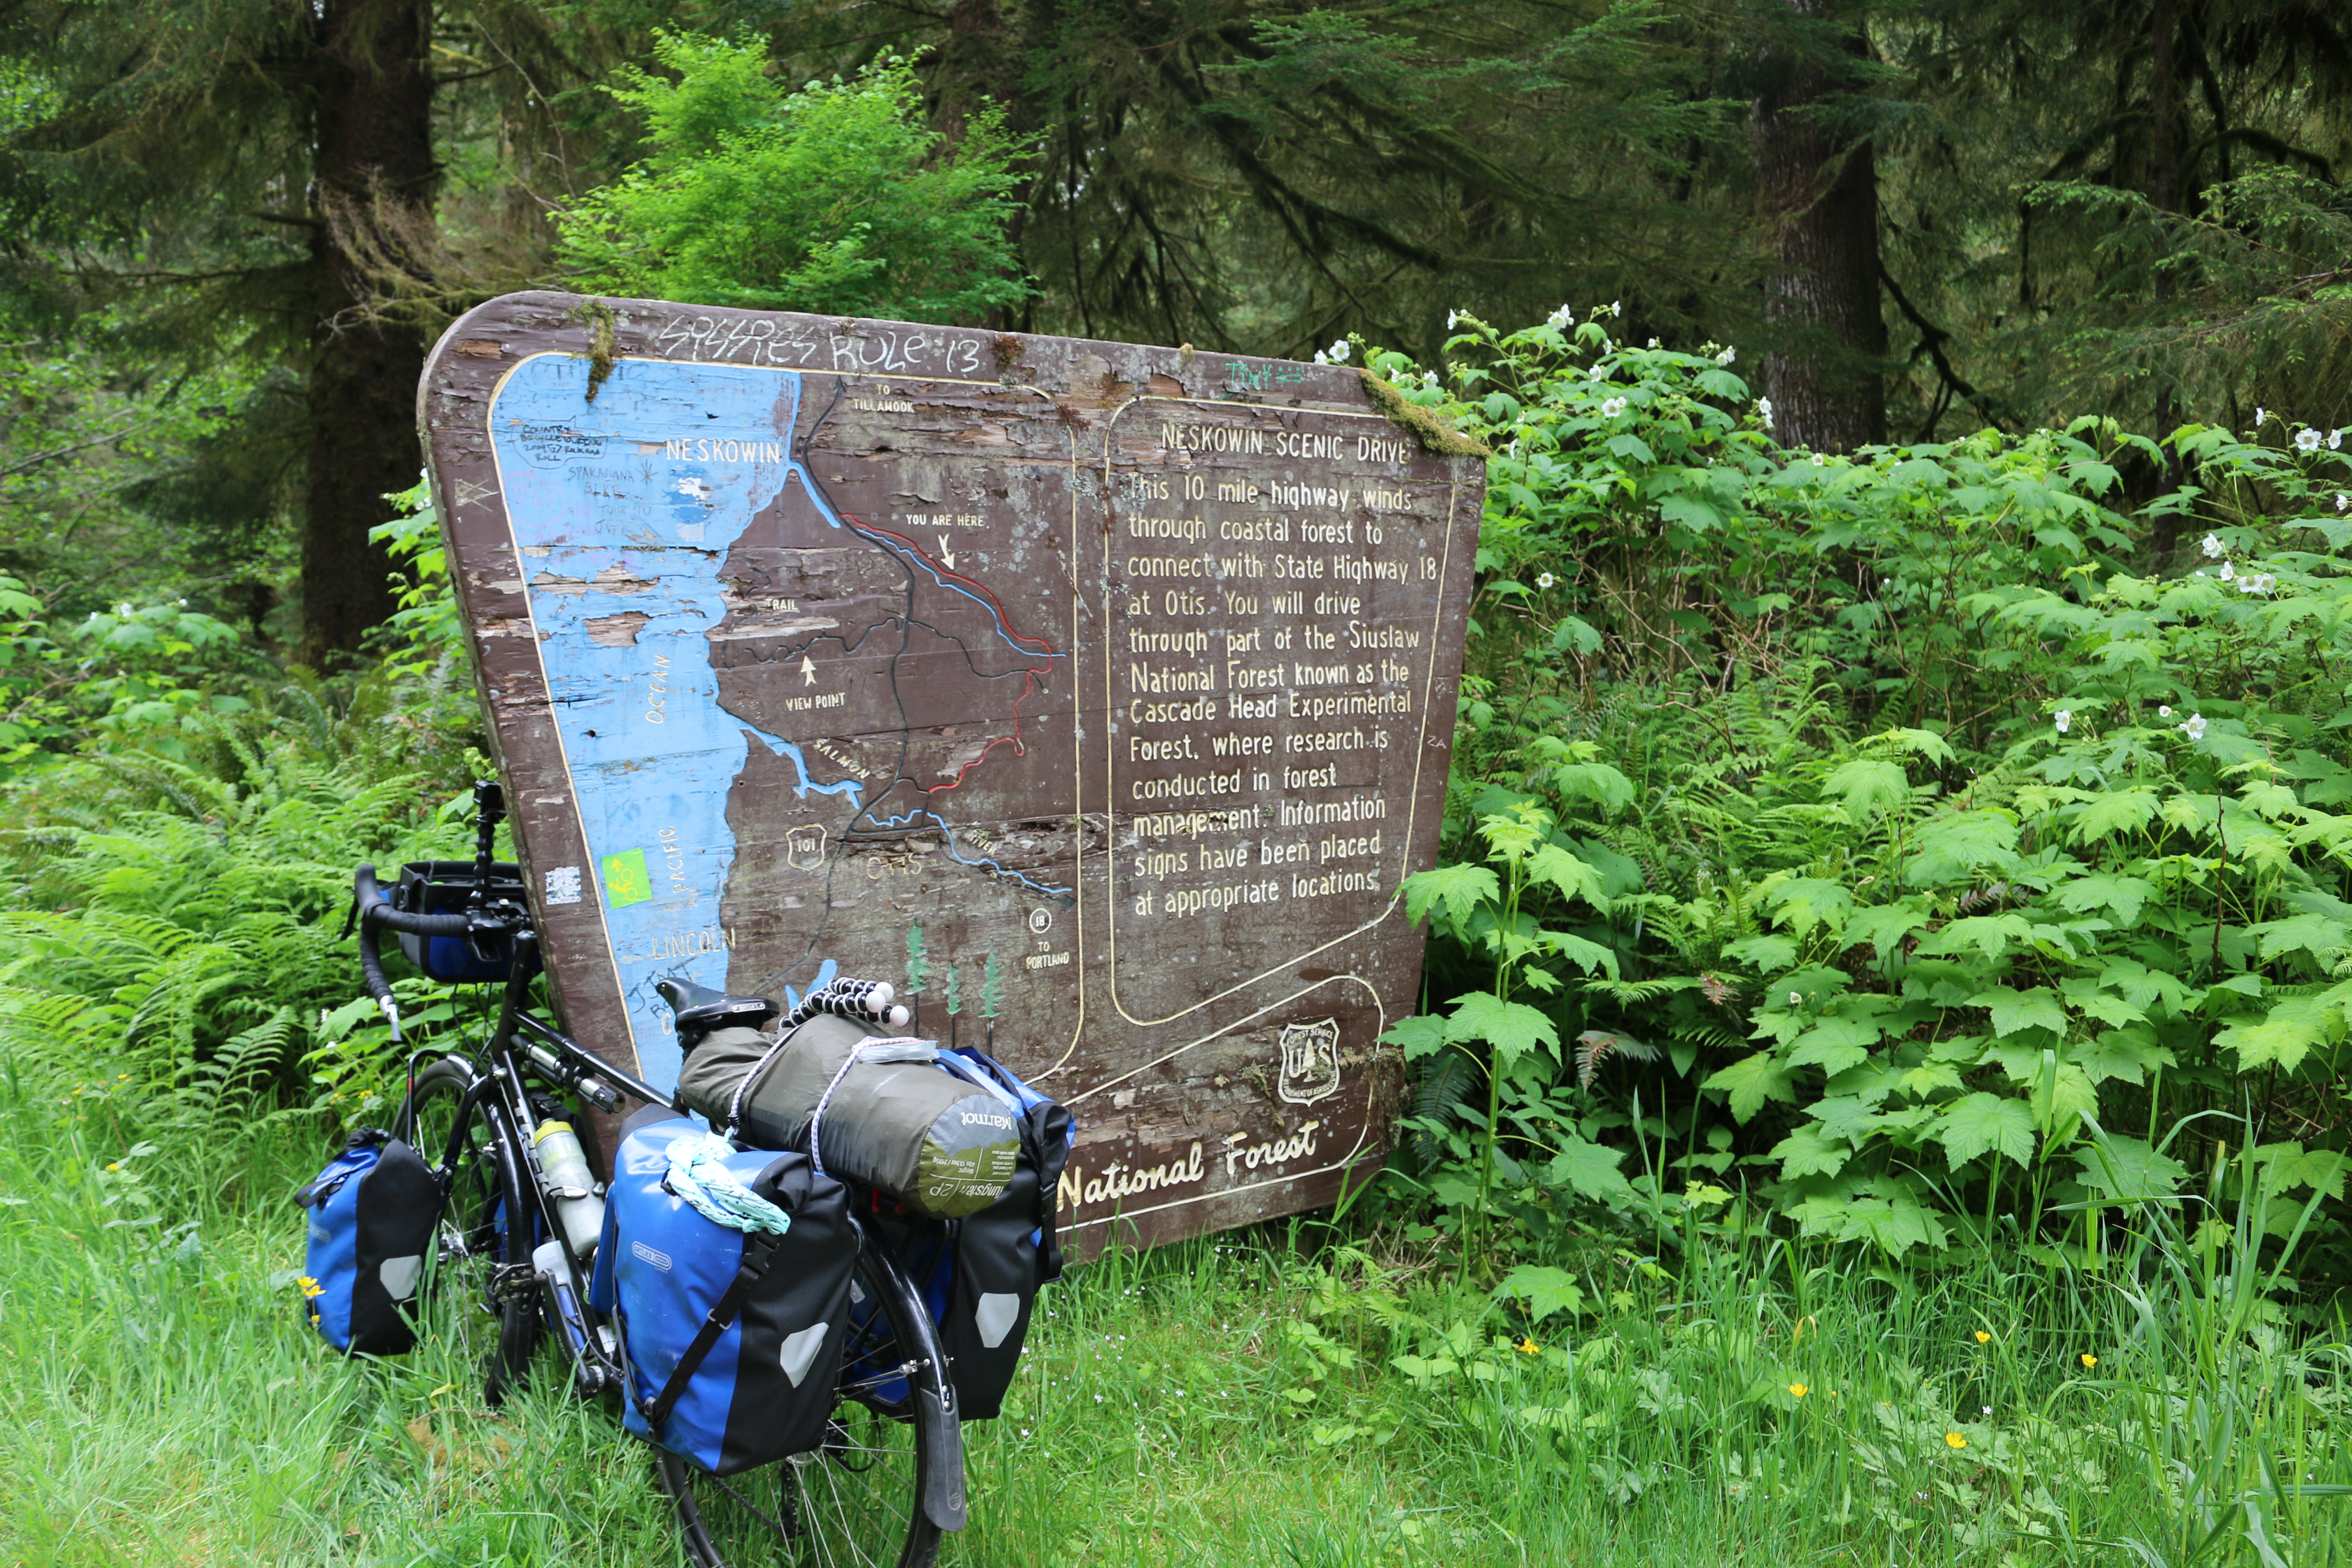 Loaded bike learning up against an old sign showing a map and description of the Neskowin Scenic Drive